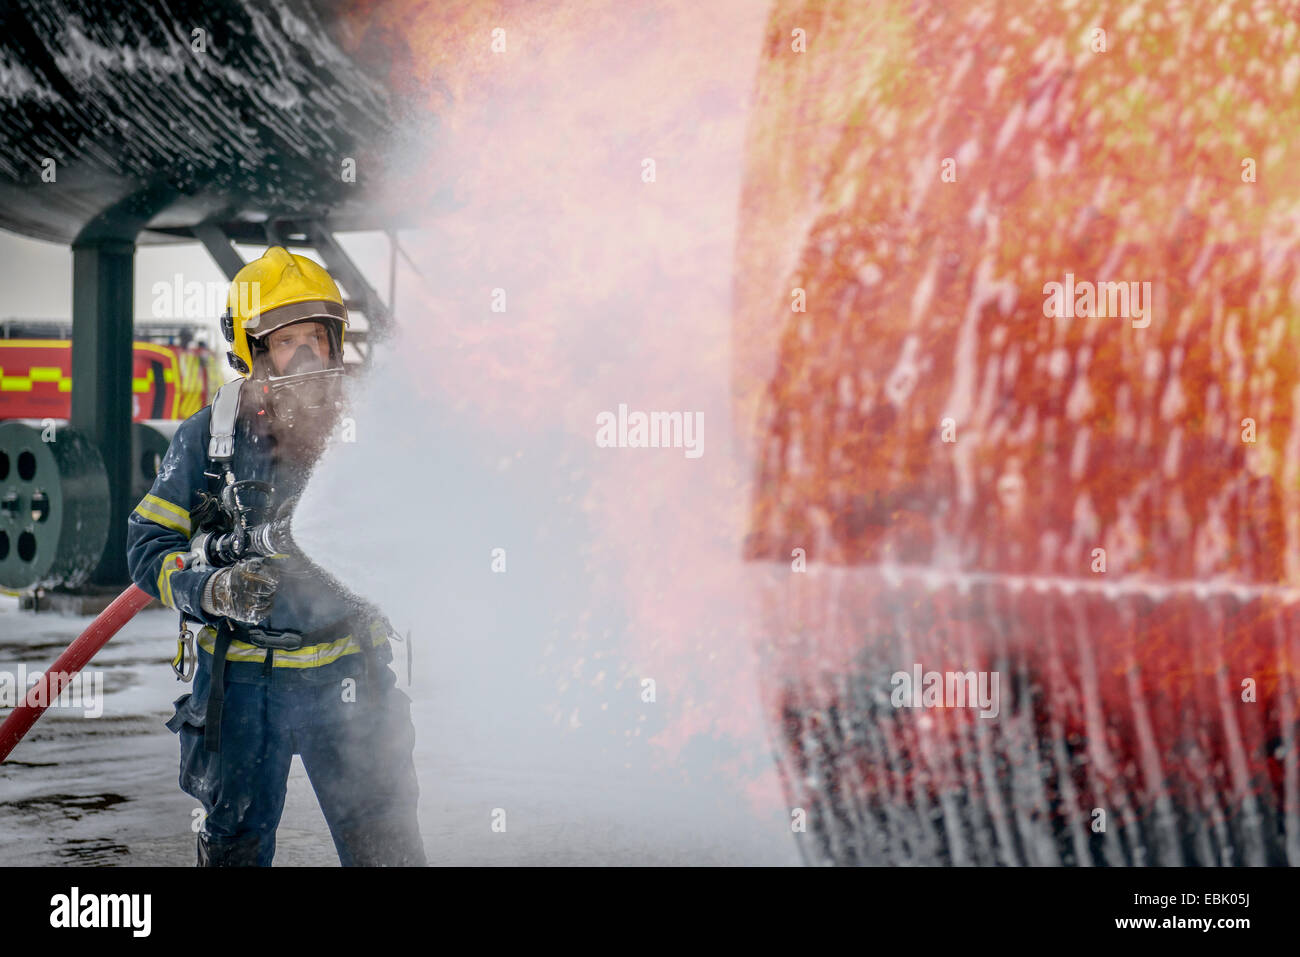 Fireman spraying water on simulated aircraft fire at training facility Stock Photo